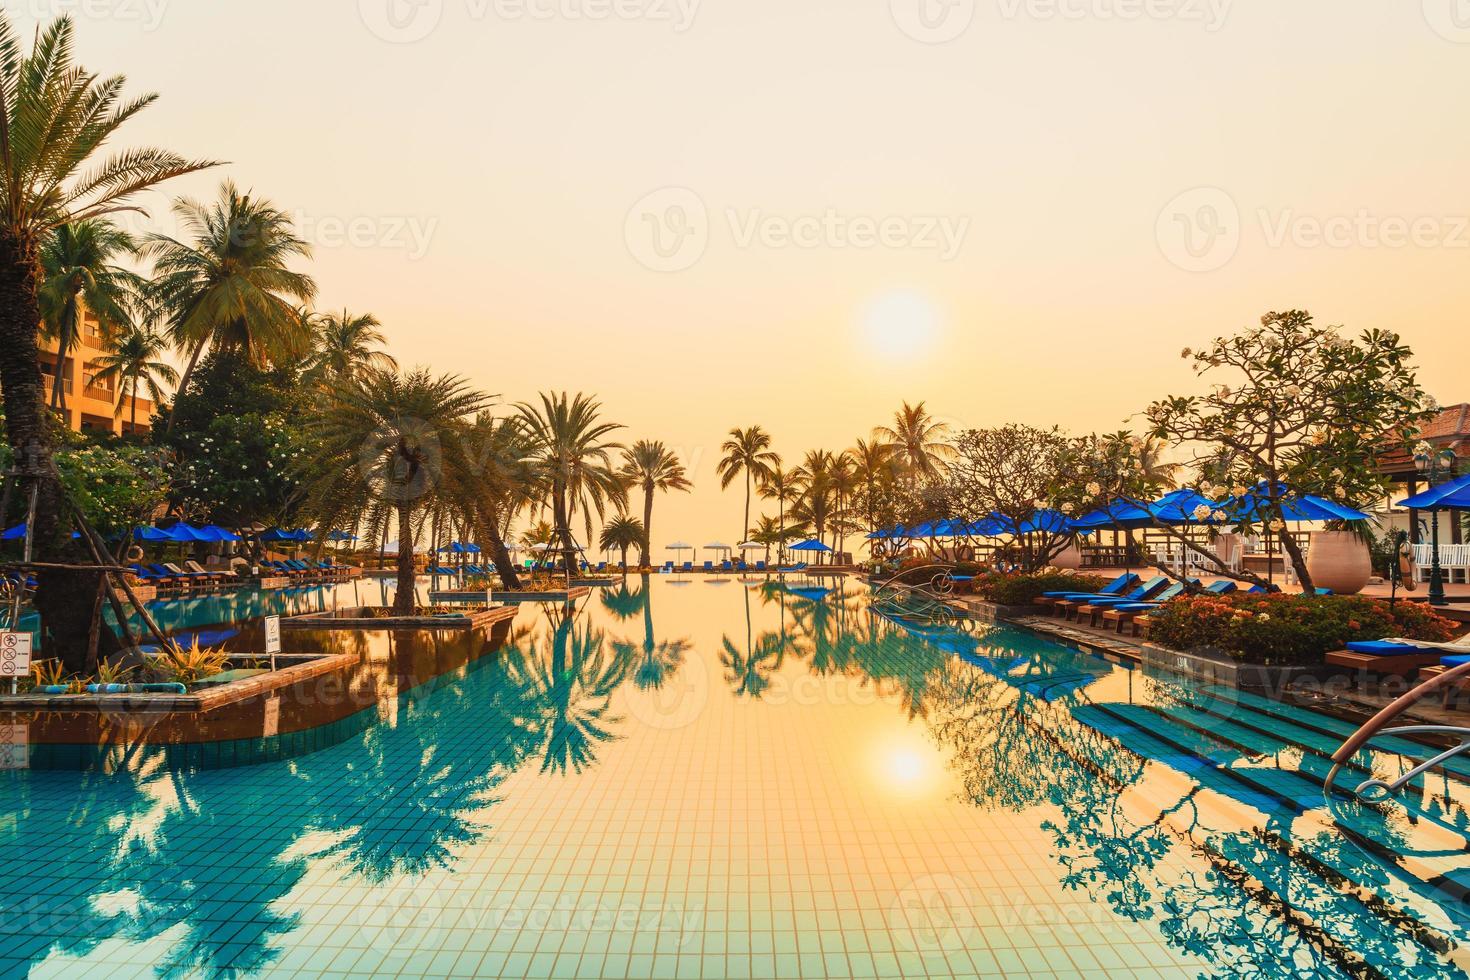 palm tree with umbrella chair pool in luxury hotel resort at sunrise times photo